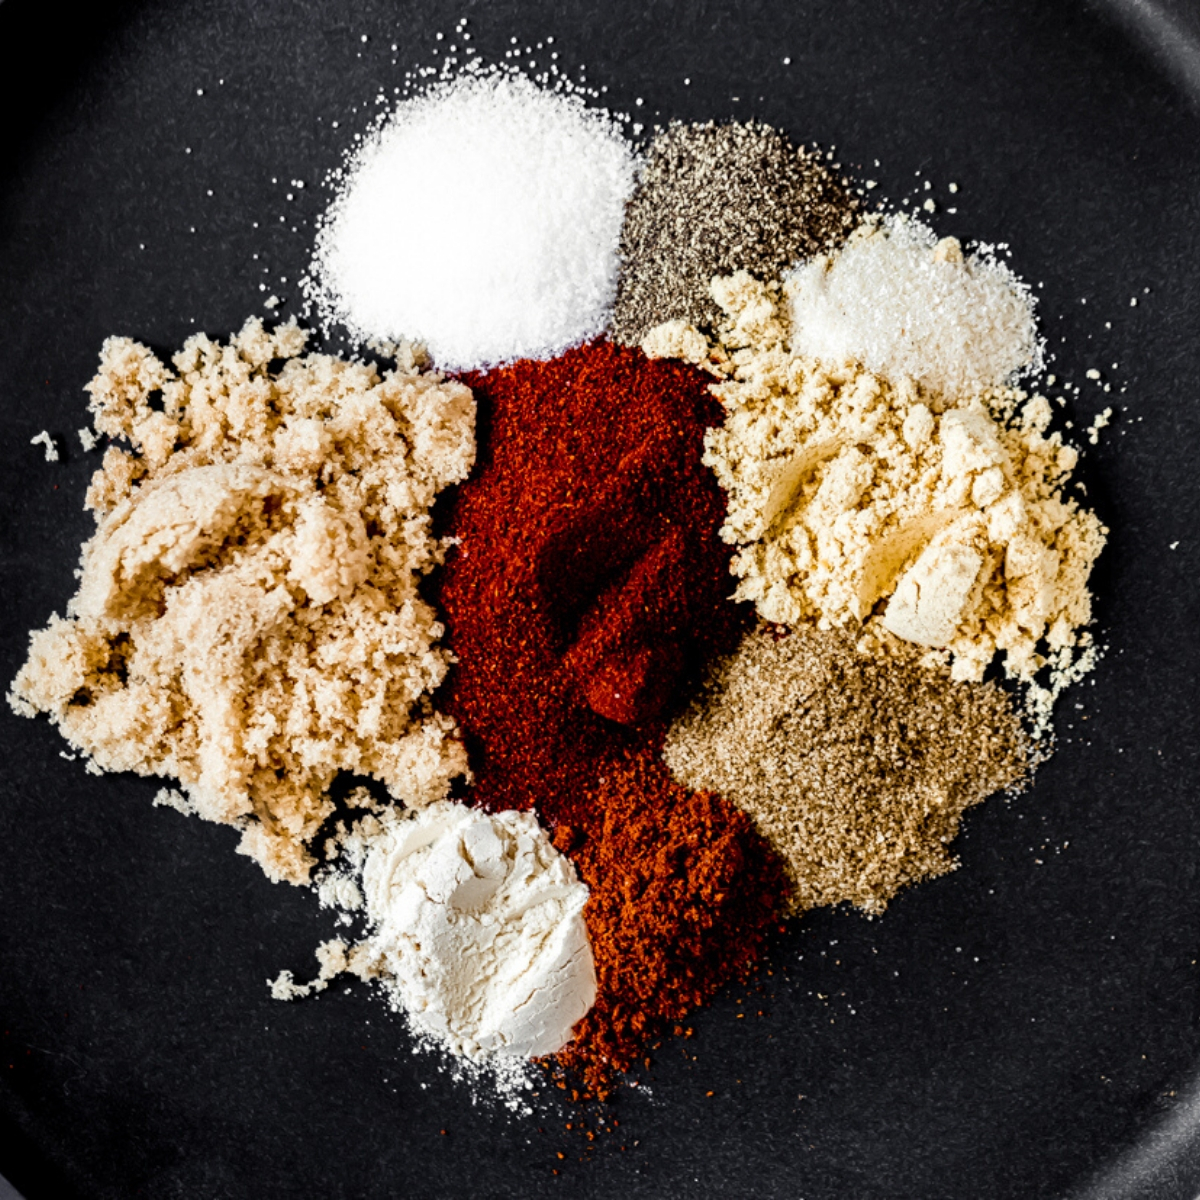 spices on a plate for a homemade seasoning blend